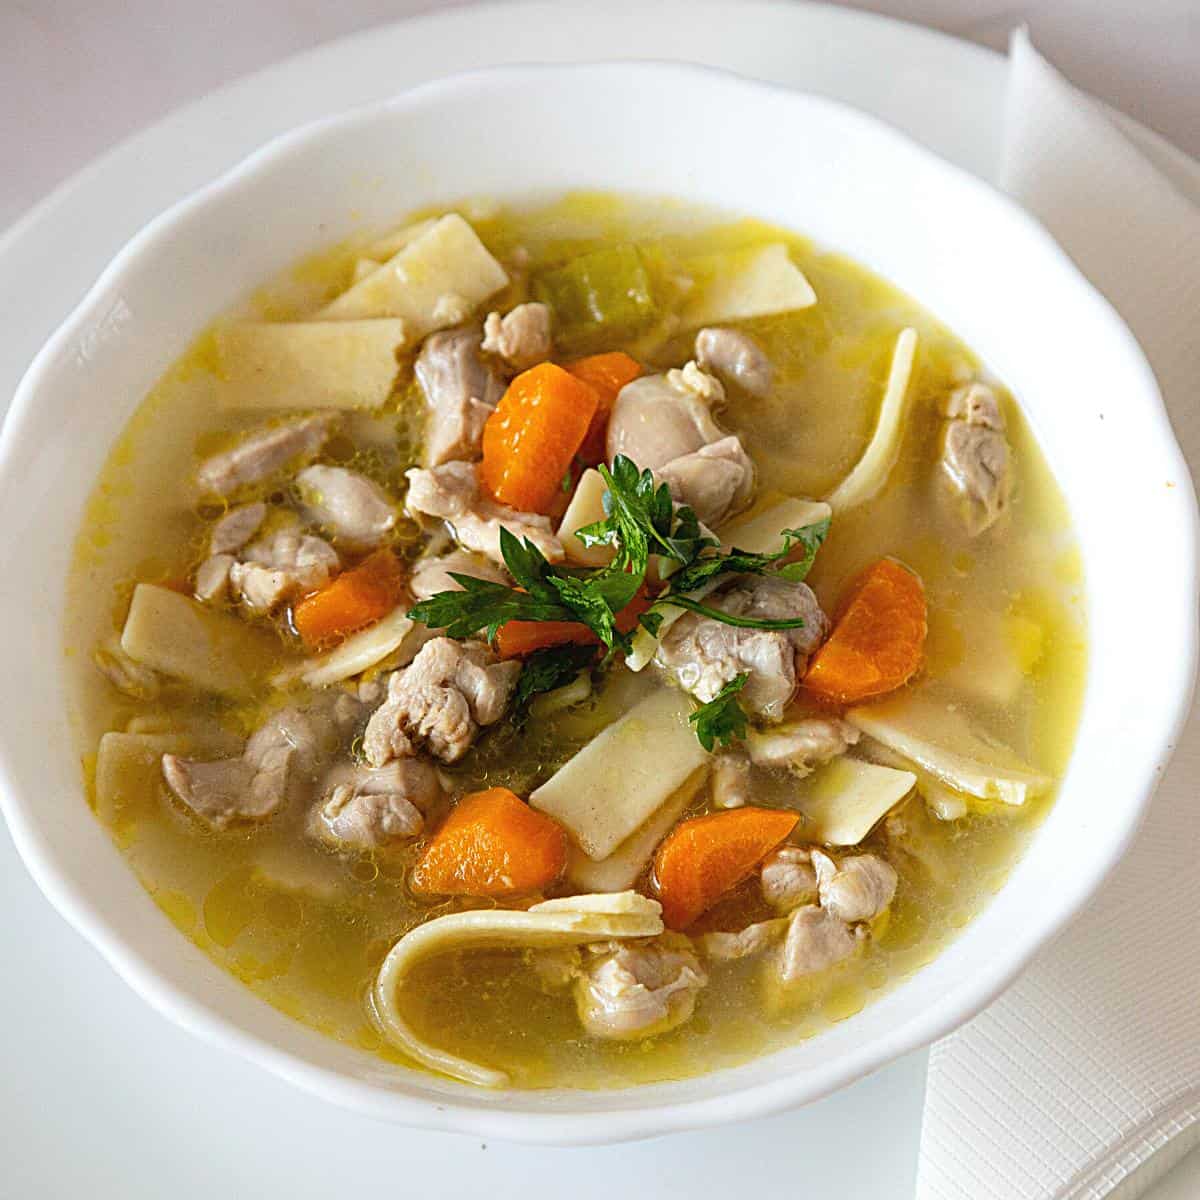 A bowl of soup with chicken and noodles.